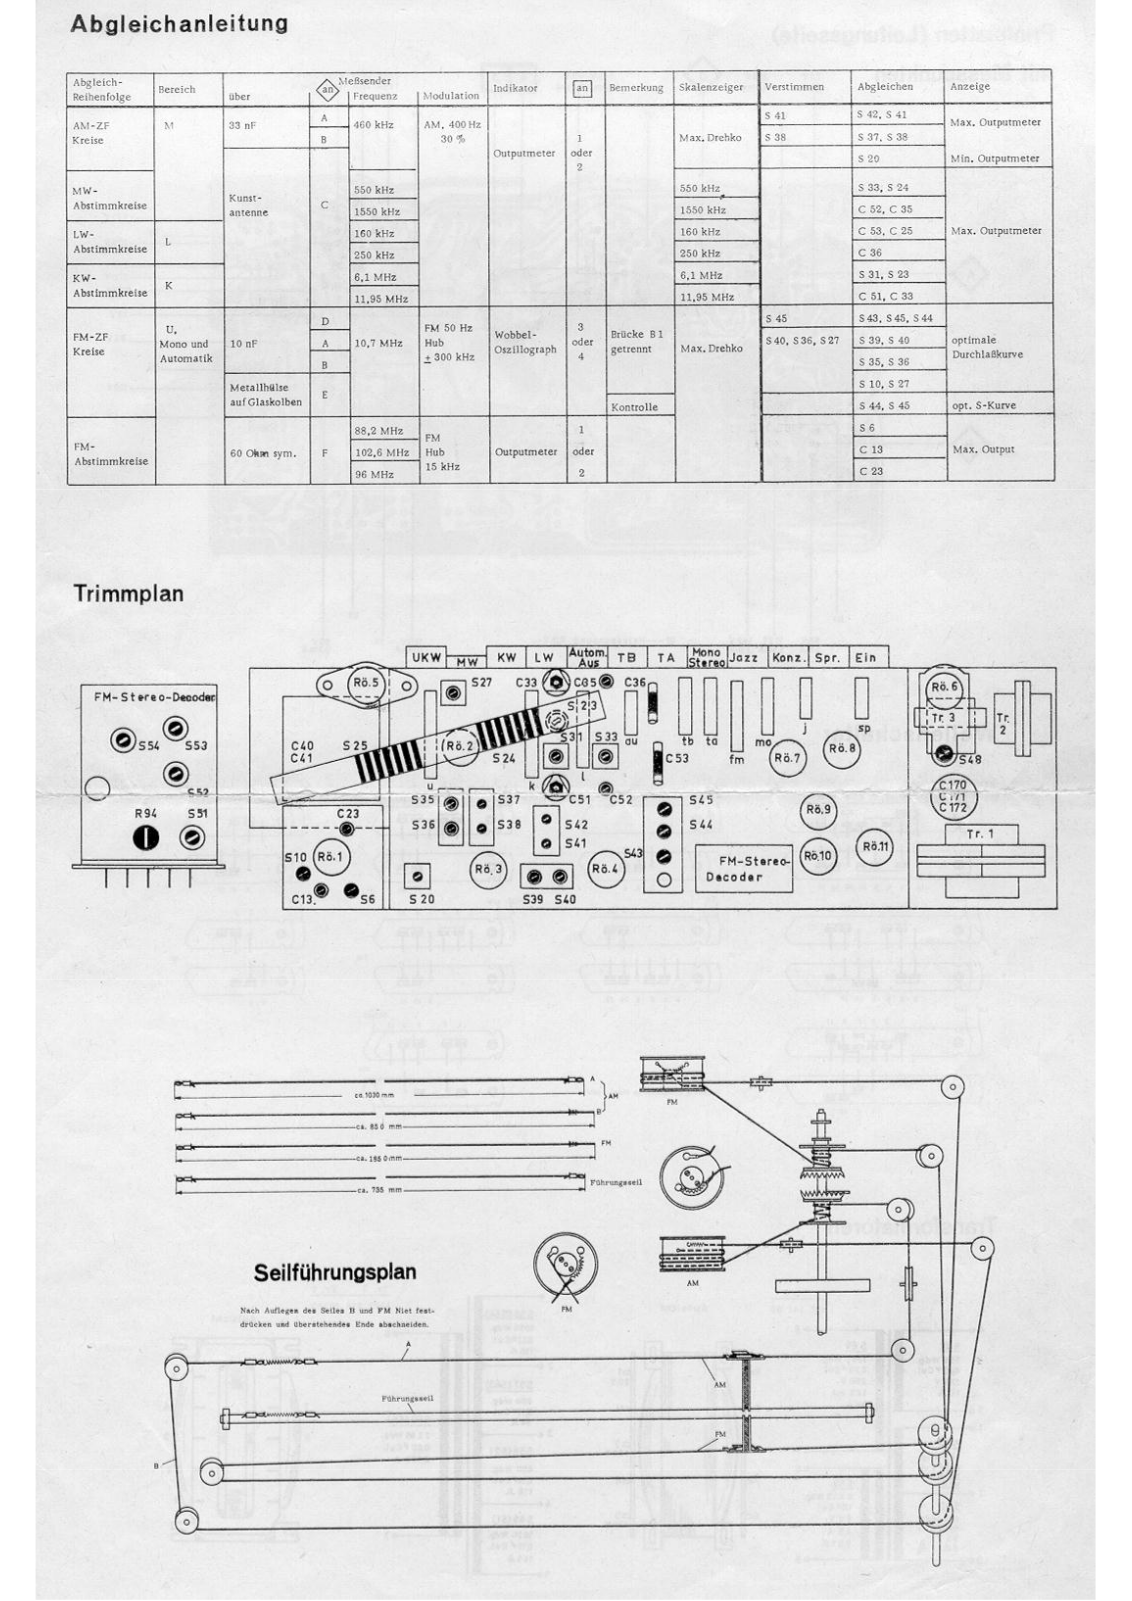 Philips B-7-D-52-AS Service Manual